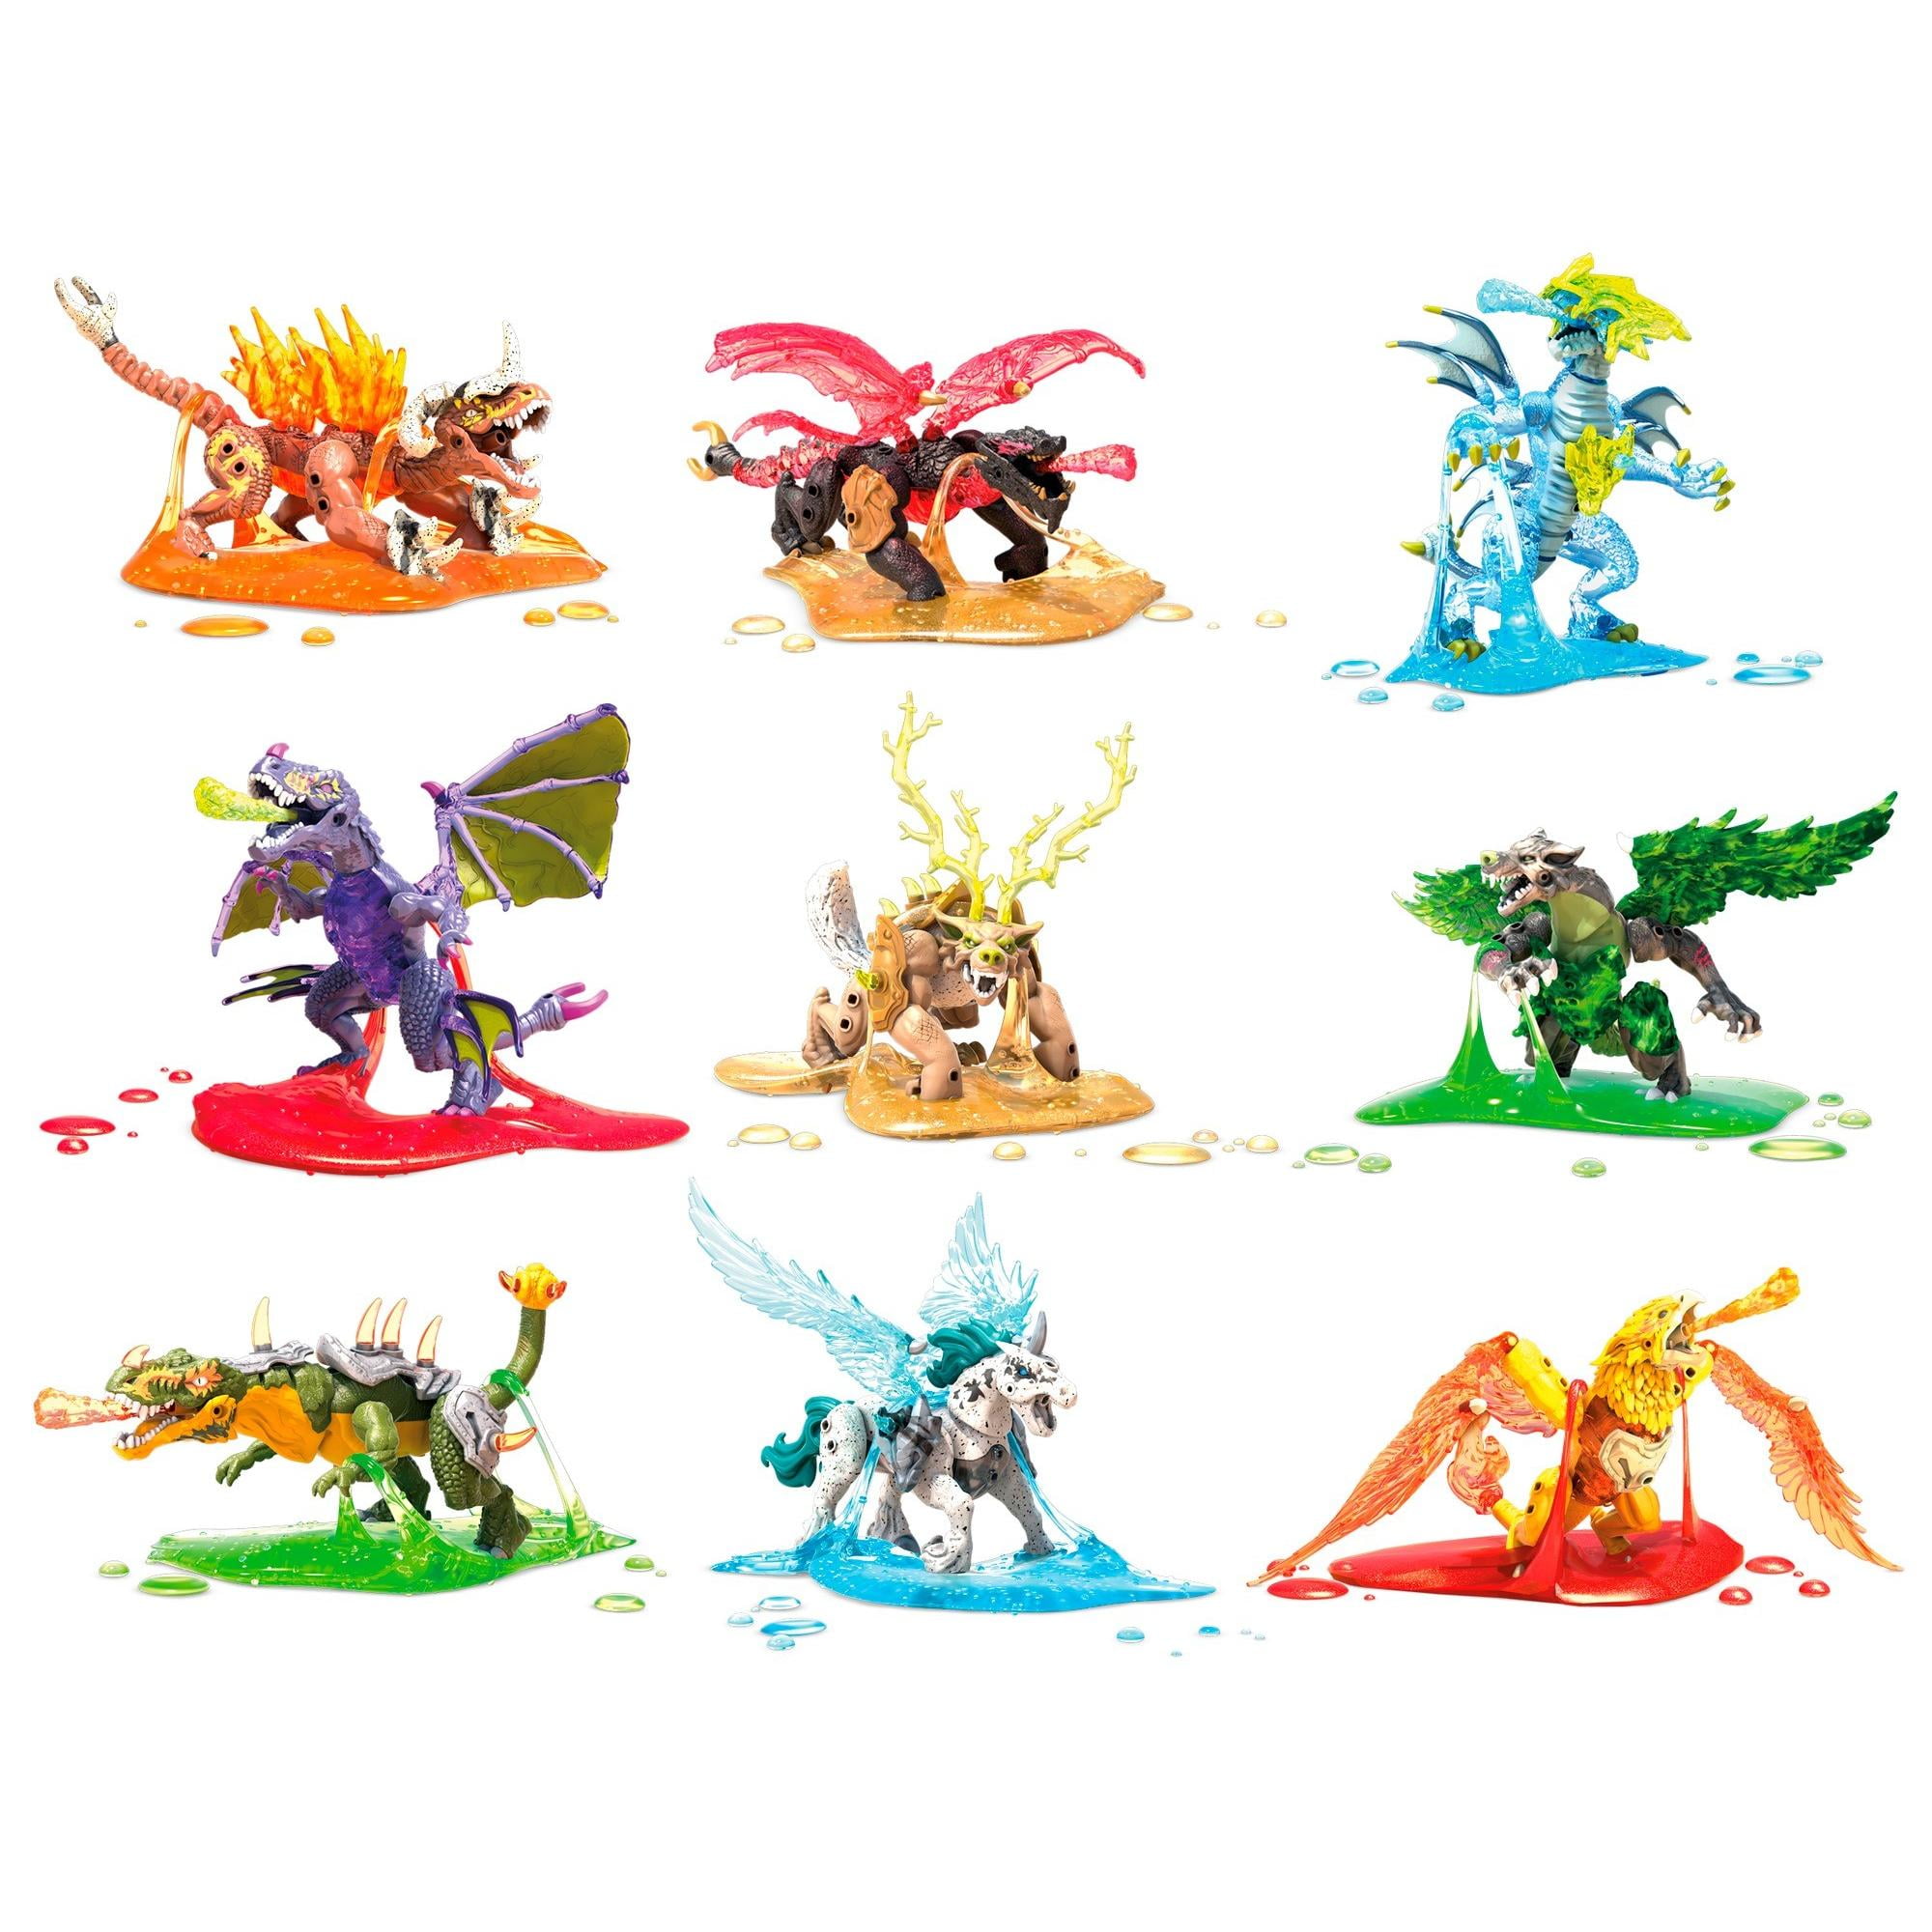 Gck31958b MEGA Construx Breakout Beasts Wave 2 Styles May Vary Multicolor for sale online 